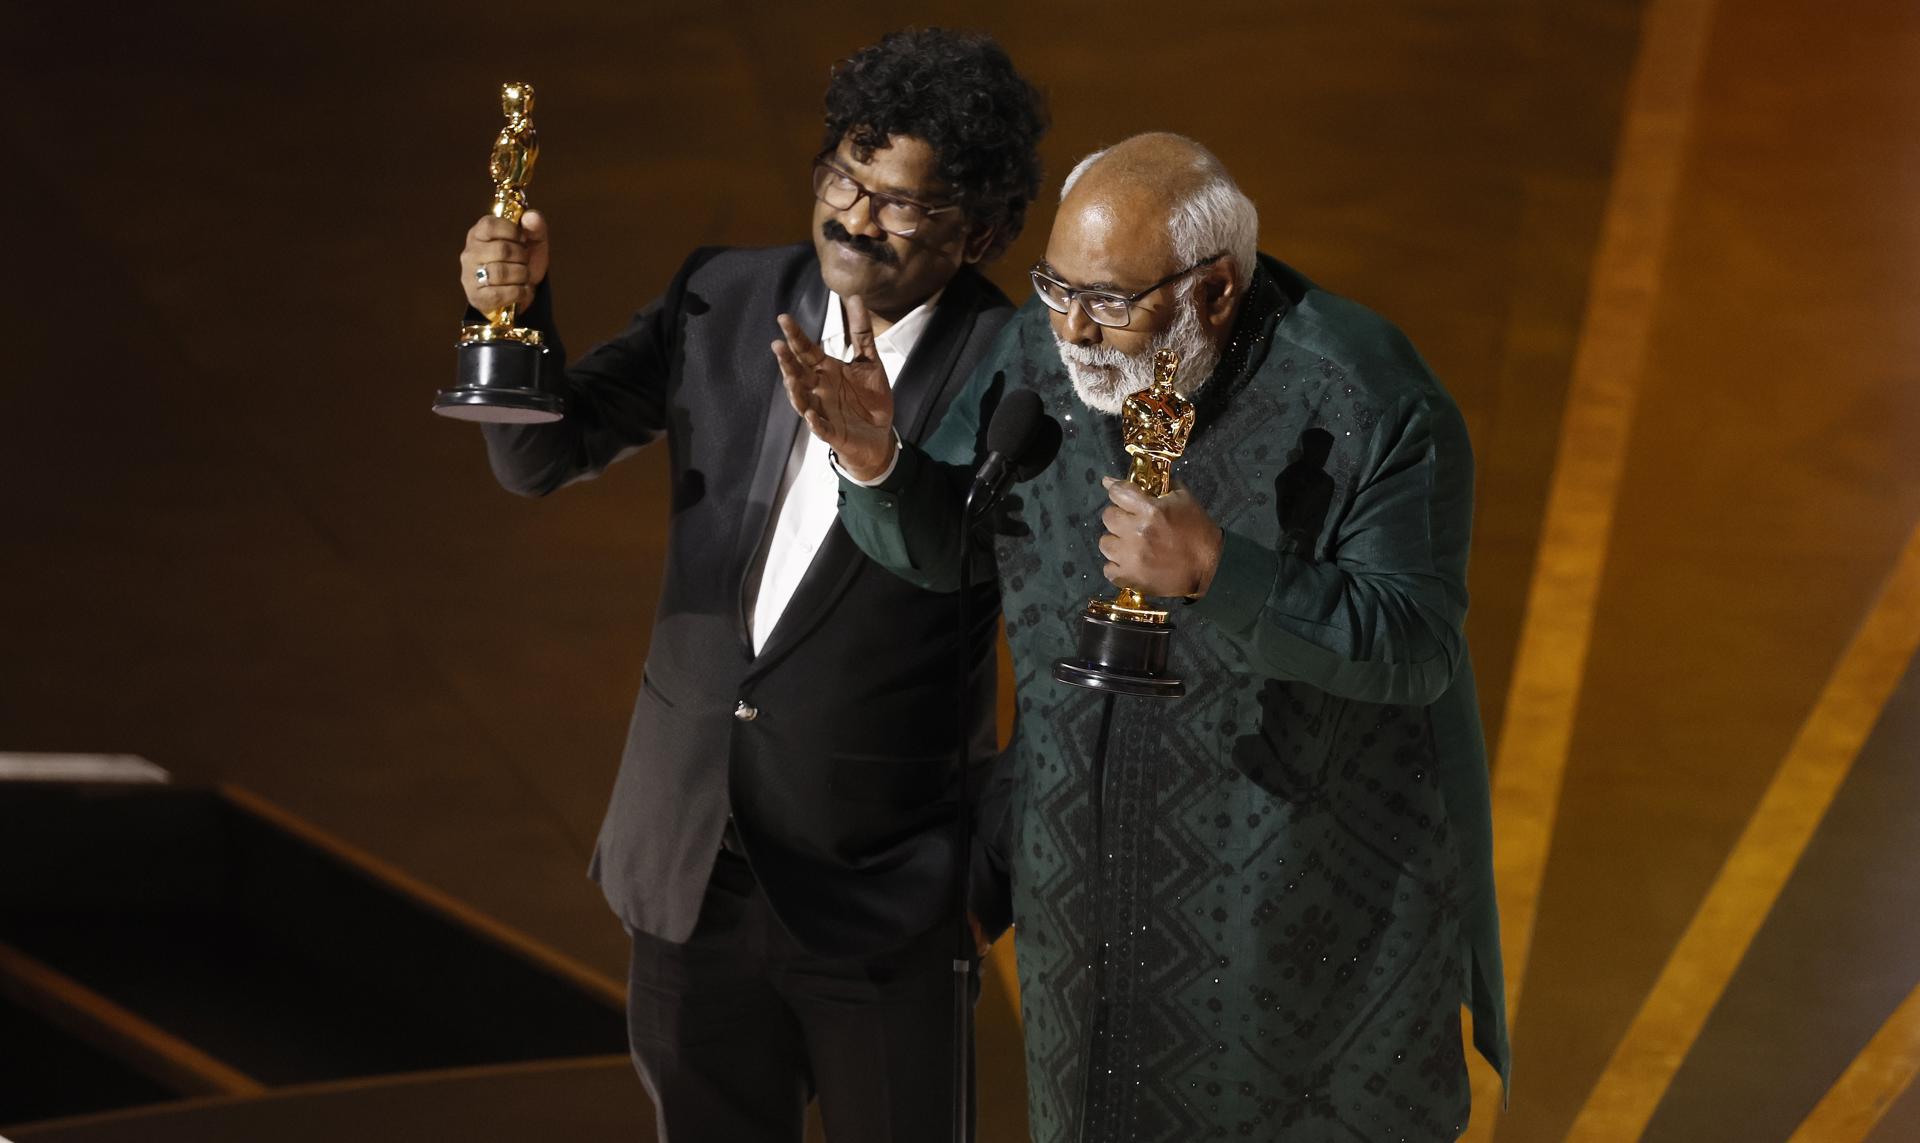 Chandrabose (L) and M.M. Keeravaani after winning the Oscar for Best Music (Original Song) for 'Naatu Naatu' from 'RRR' during the 95th annual Academy Awards ceremony at the Dolby Theatre in Hollywood, Los Angeles, California, USA, 12 March 2023. EFE/EPA/ETIENNE LAURENT